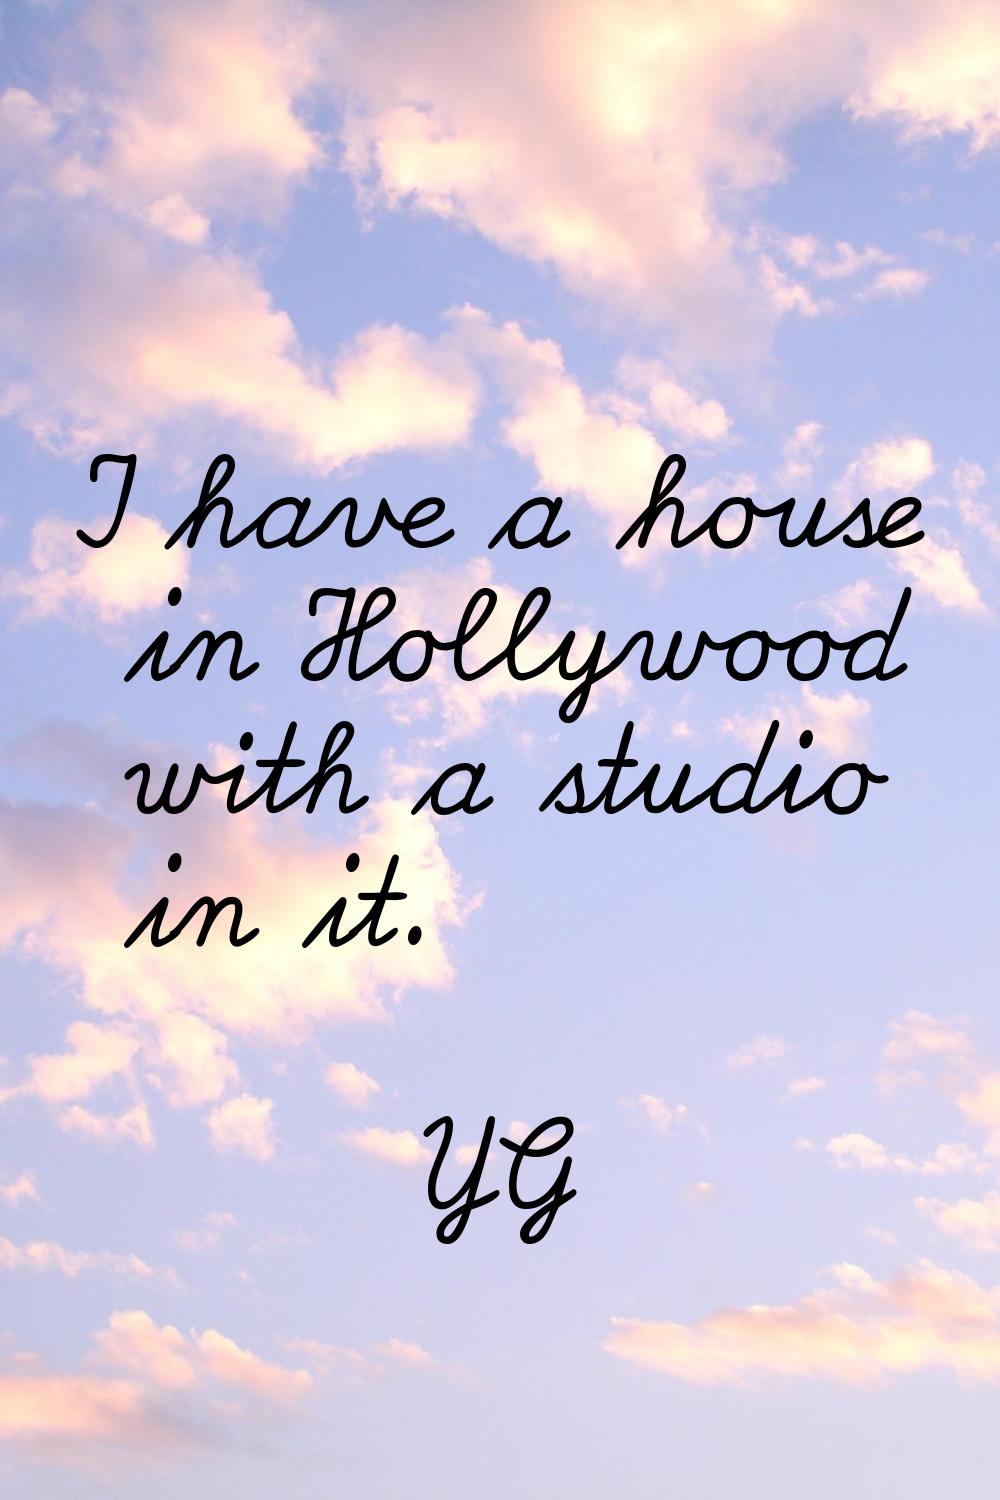 I have a house in Hollywood with a studio in it.